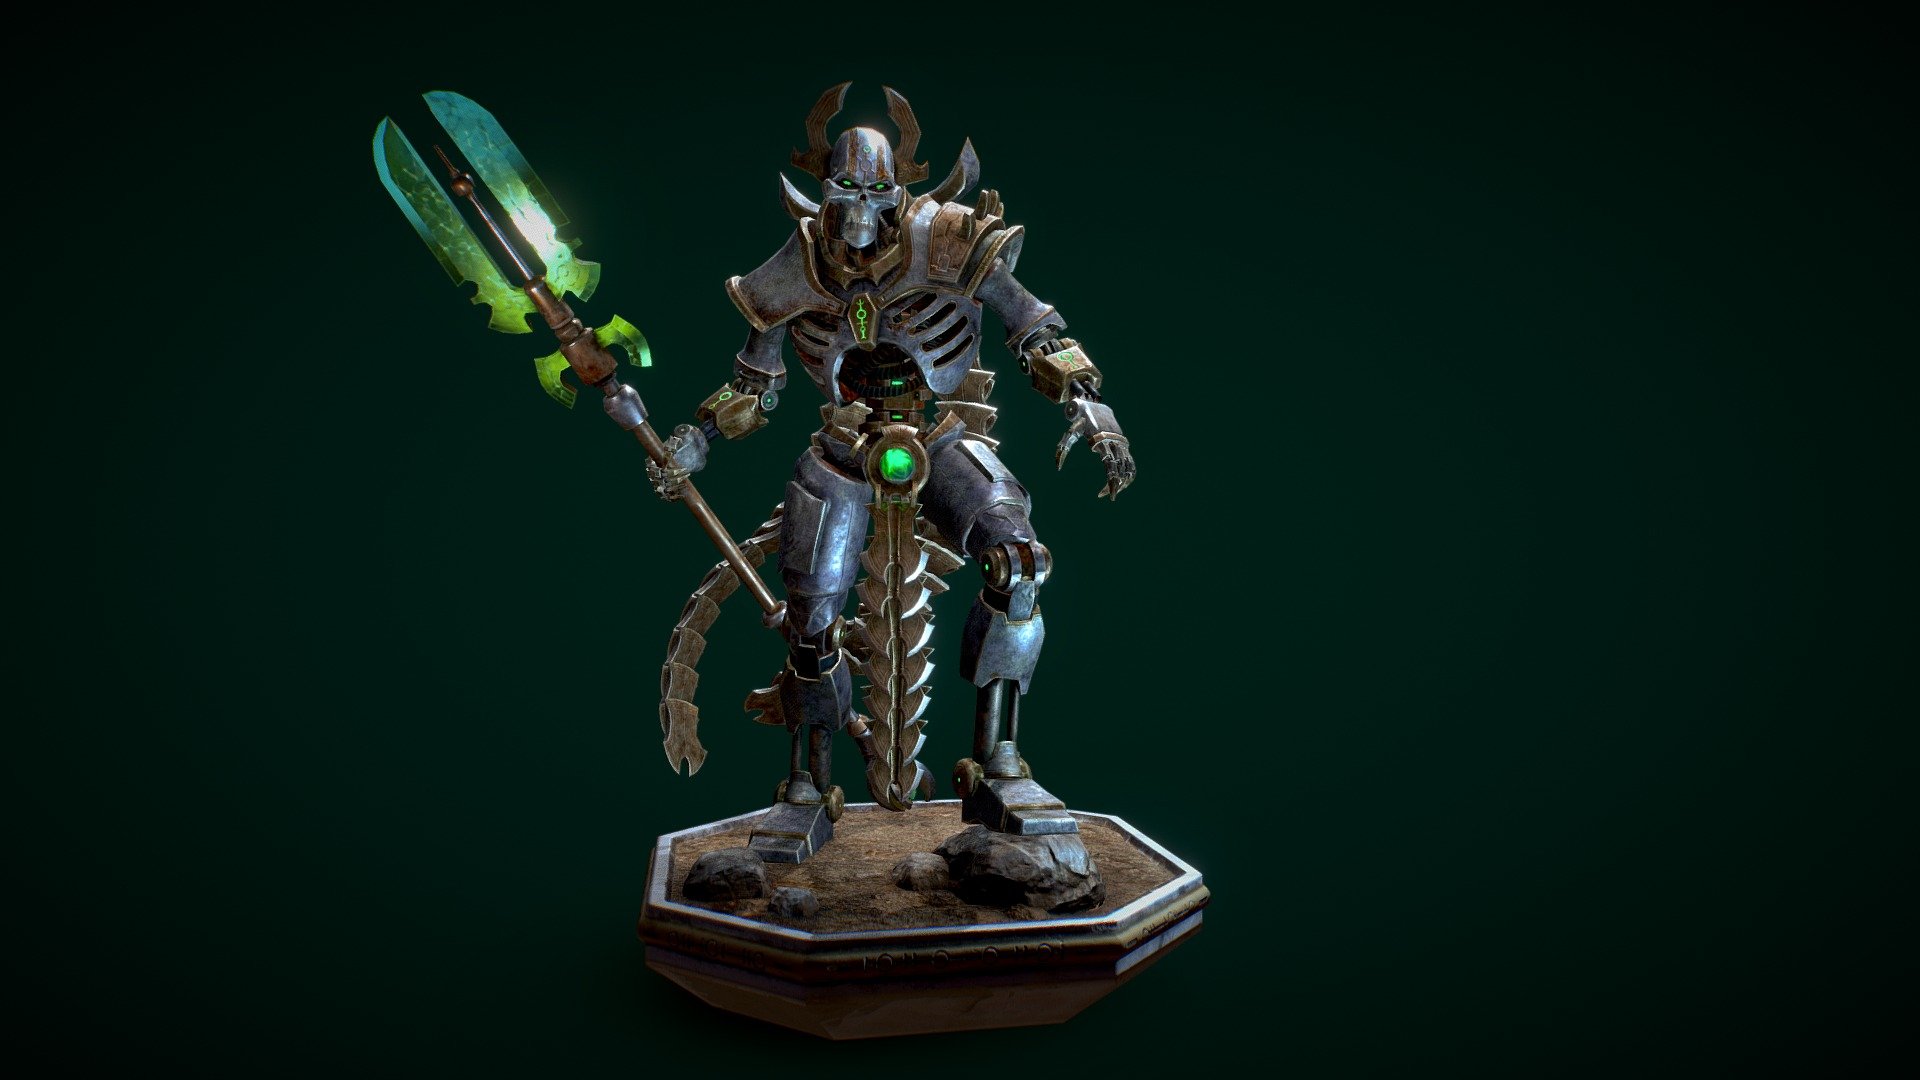 My graduation work from Draft Punk 2.0 courses at XYZ School.
a Necron overlord from Warhammer 40k universe
Game-ready model, 4k map for the character, 2k weapon and 2k pedestal for renders.
More on artstation https://www.artstation.com/artwork/d8RaGw - Necron Overlord - 3D model by Rixael 3d model